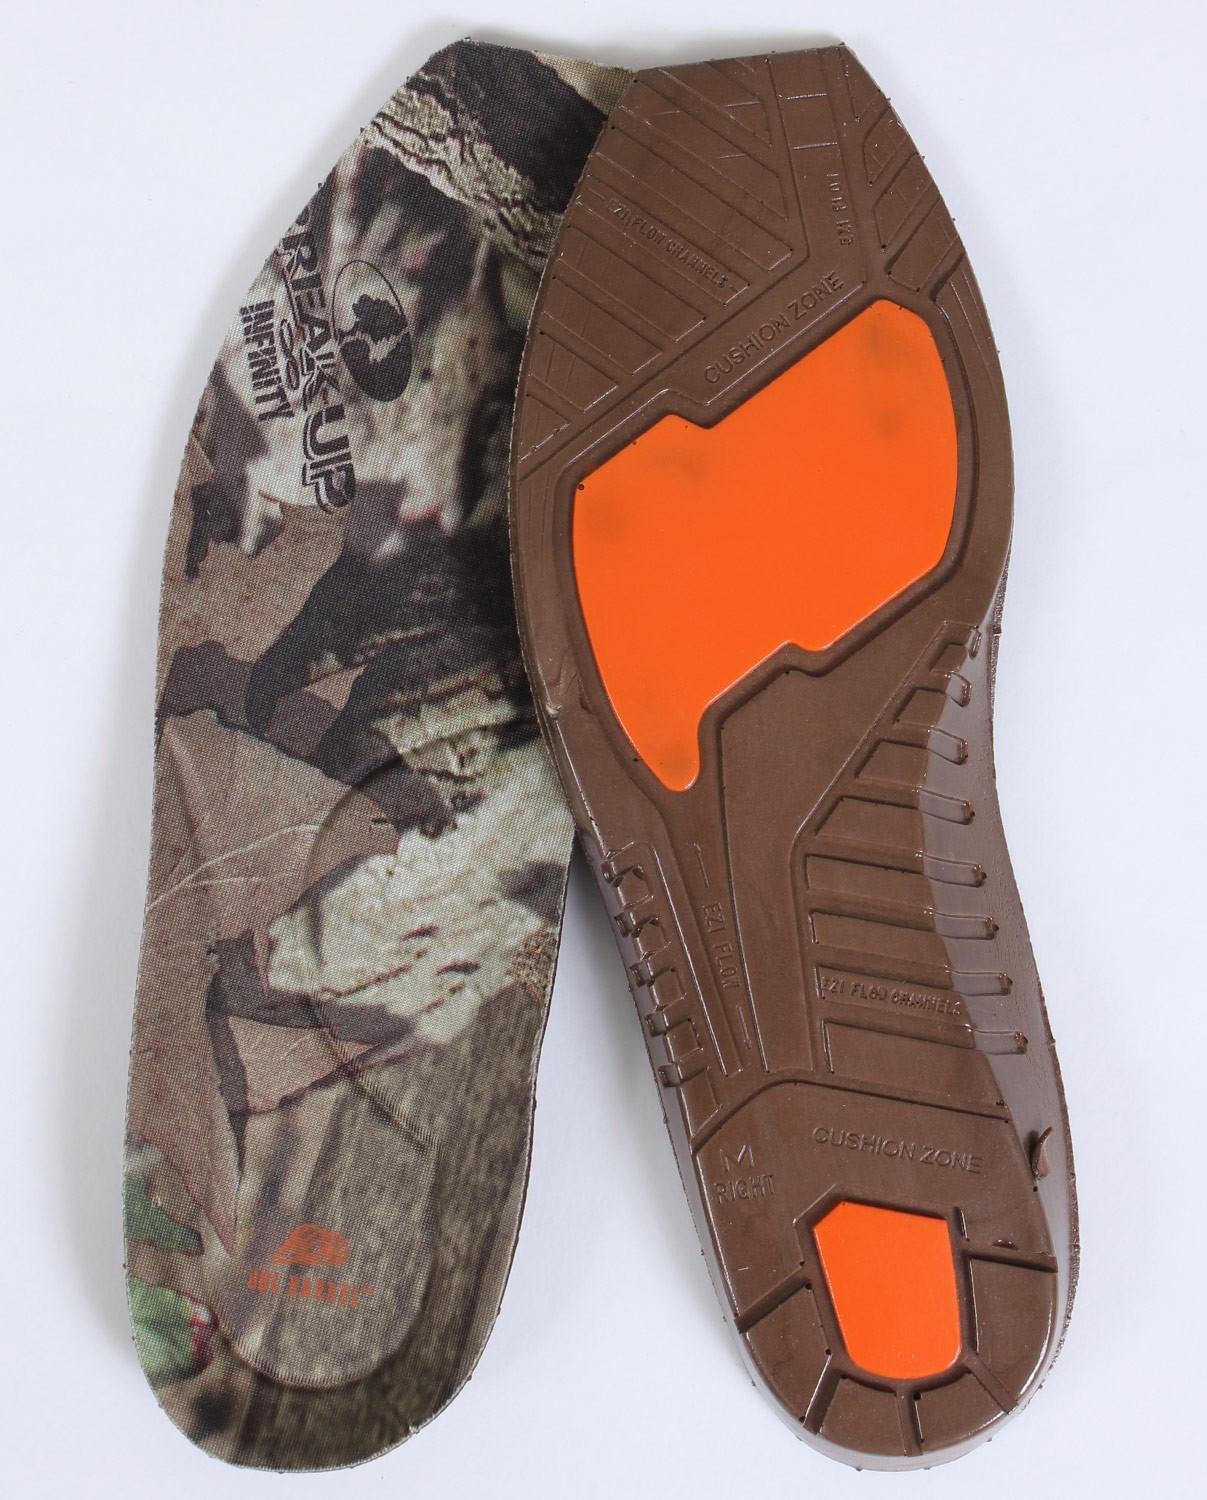 double insoles in boots